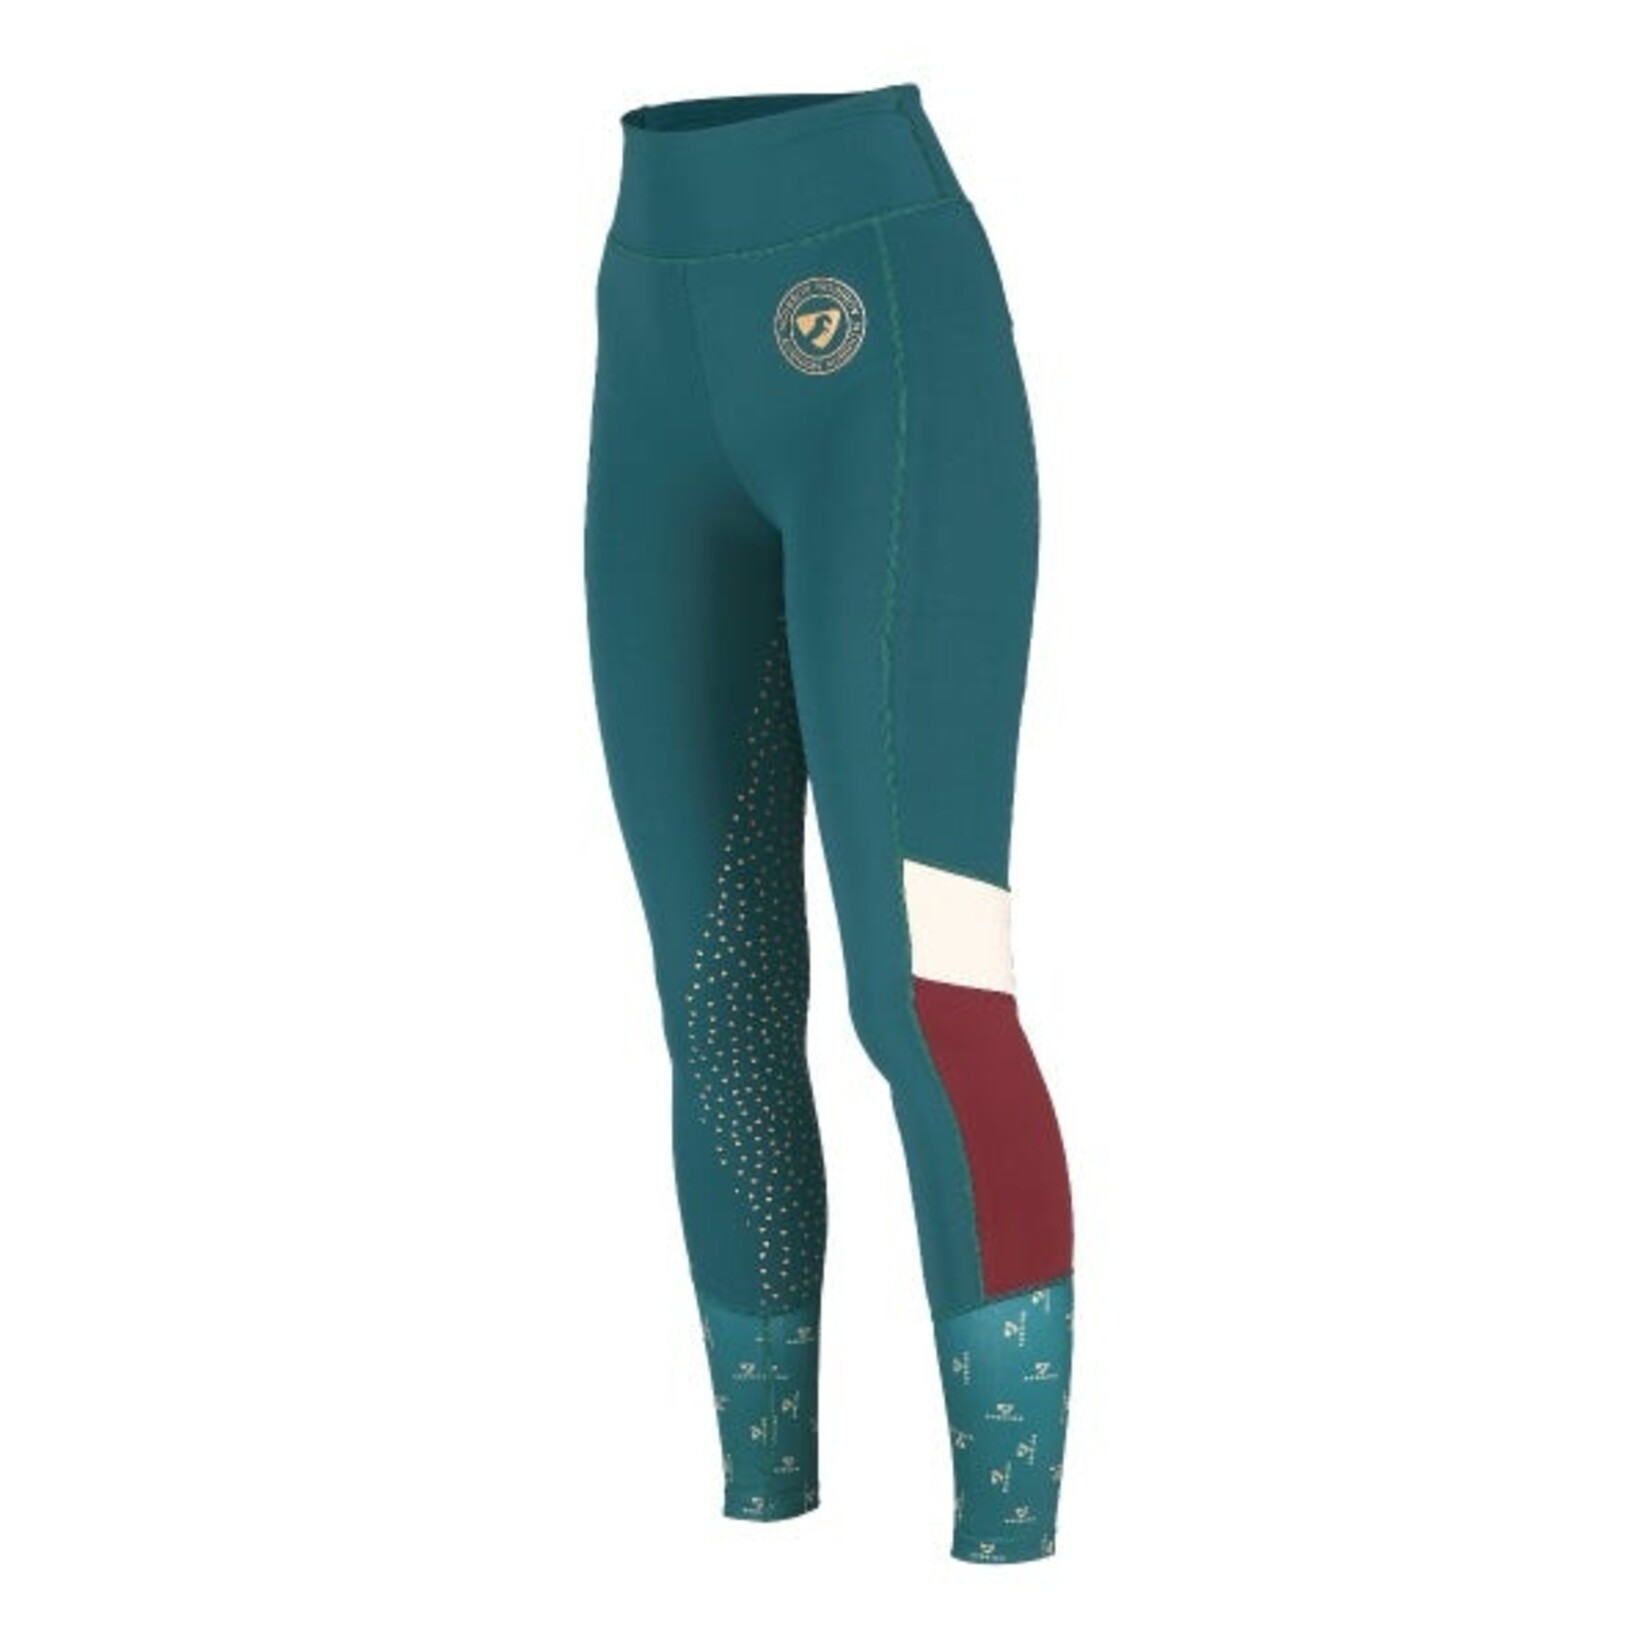 Shires Aubrion Eastcote Riding Tights